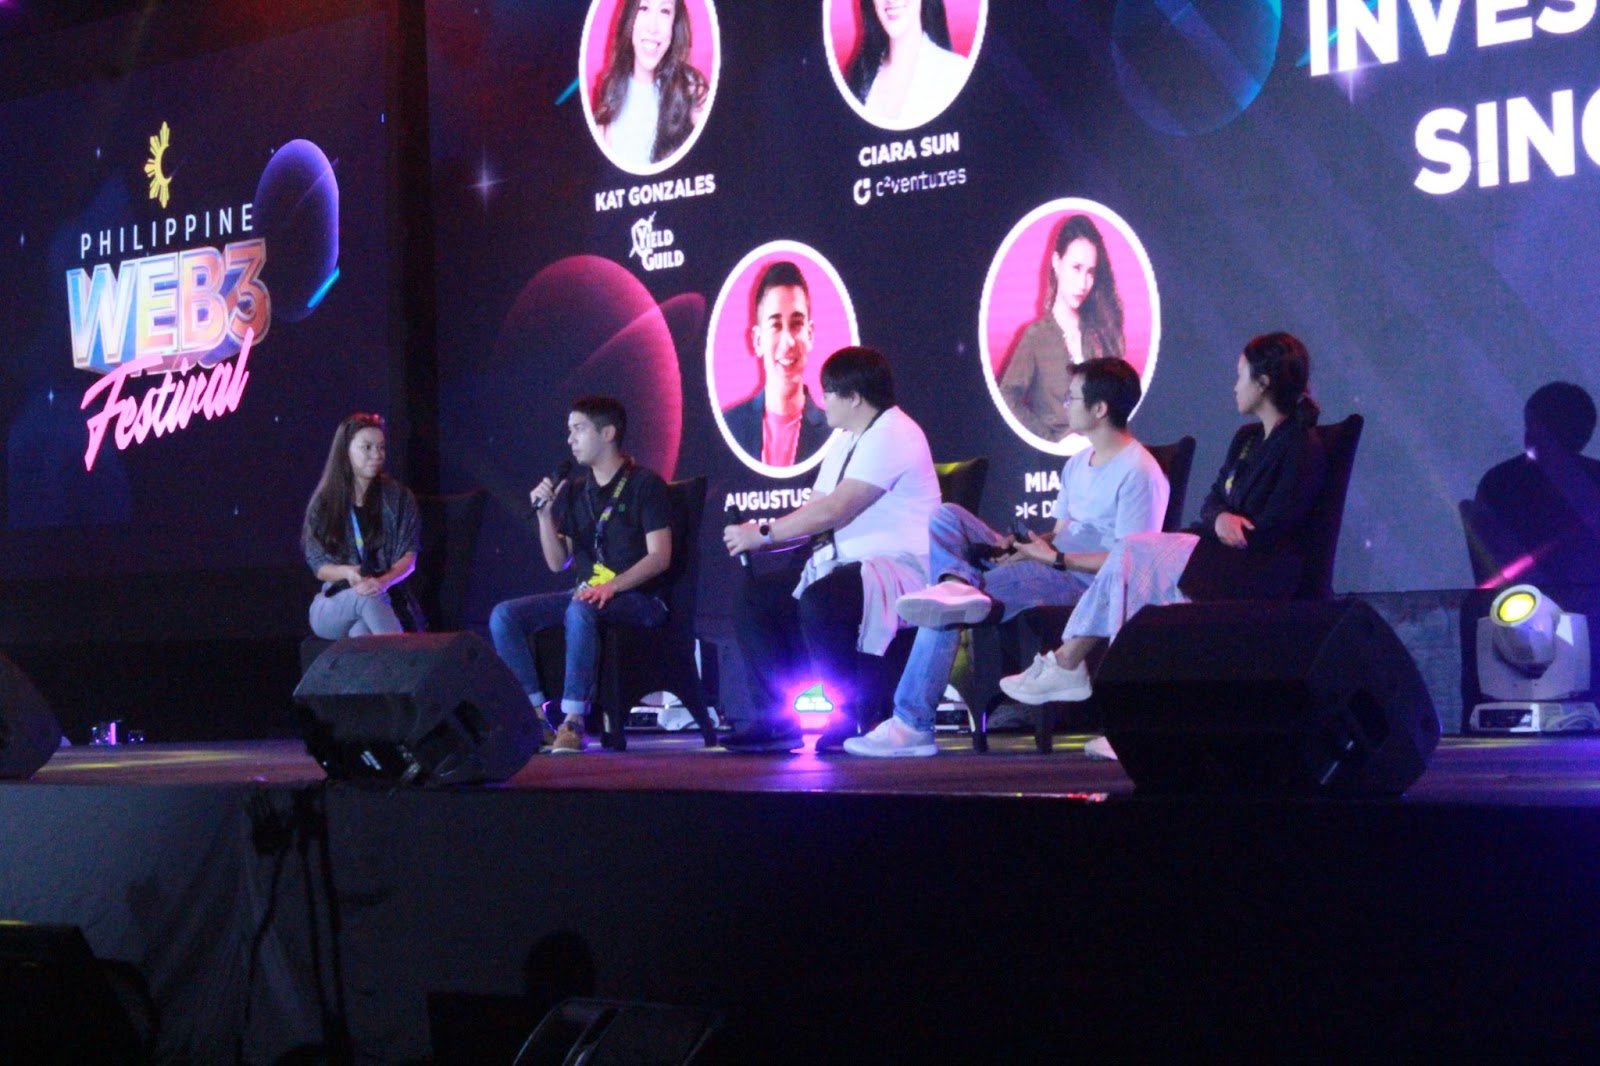 Photo for the Article - [Live - Day 2] Philippine Web3 Festival Recap